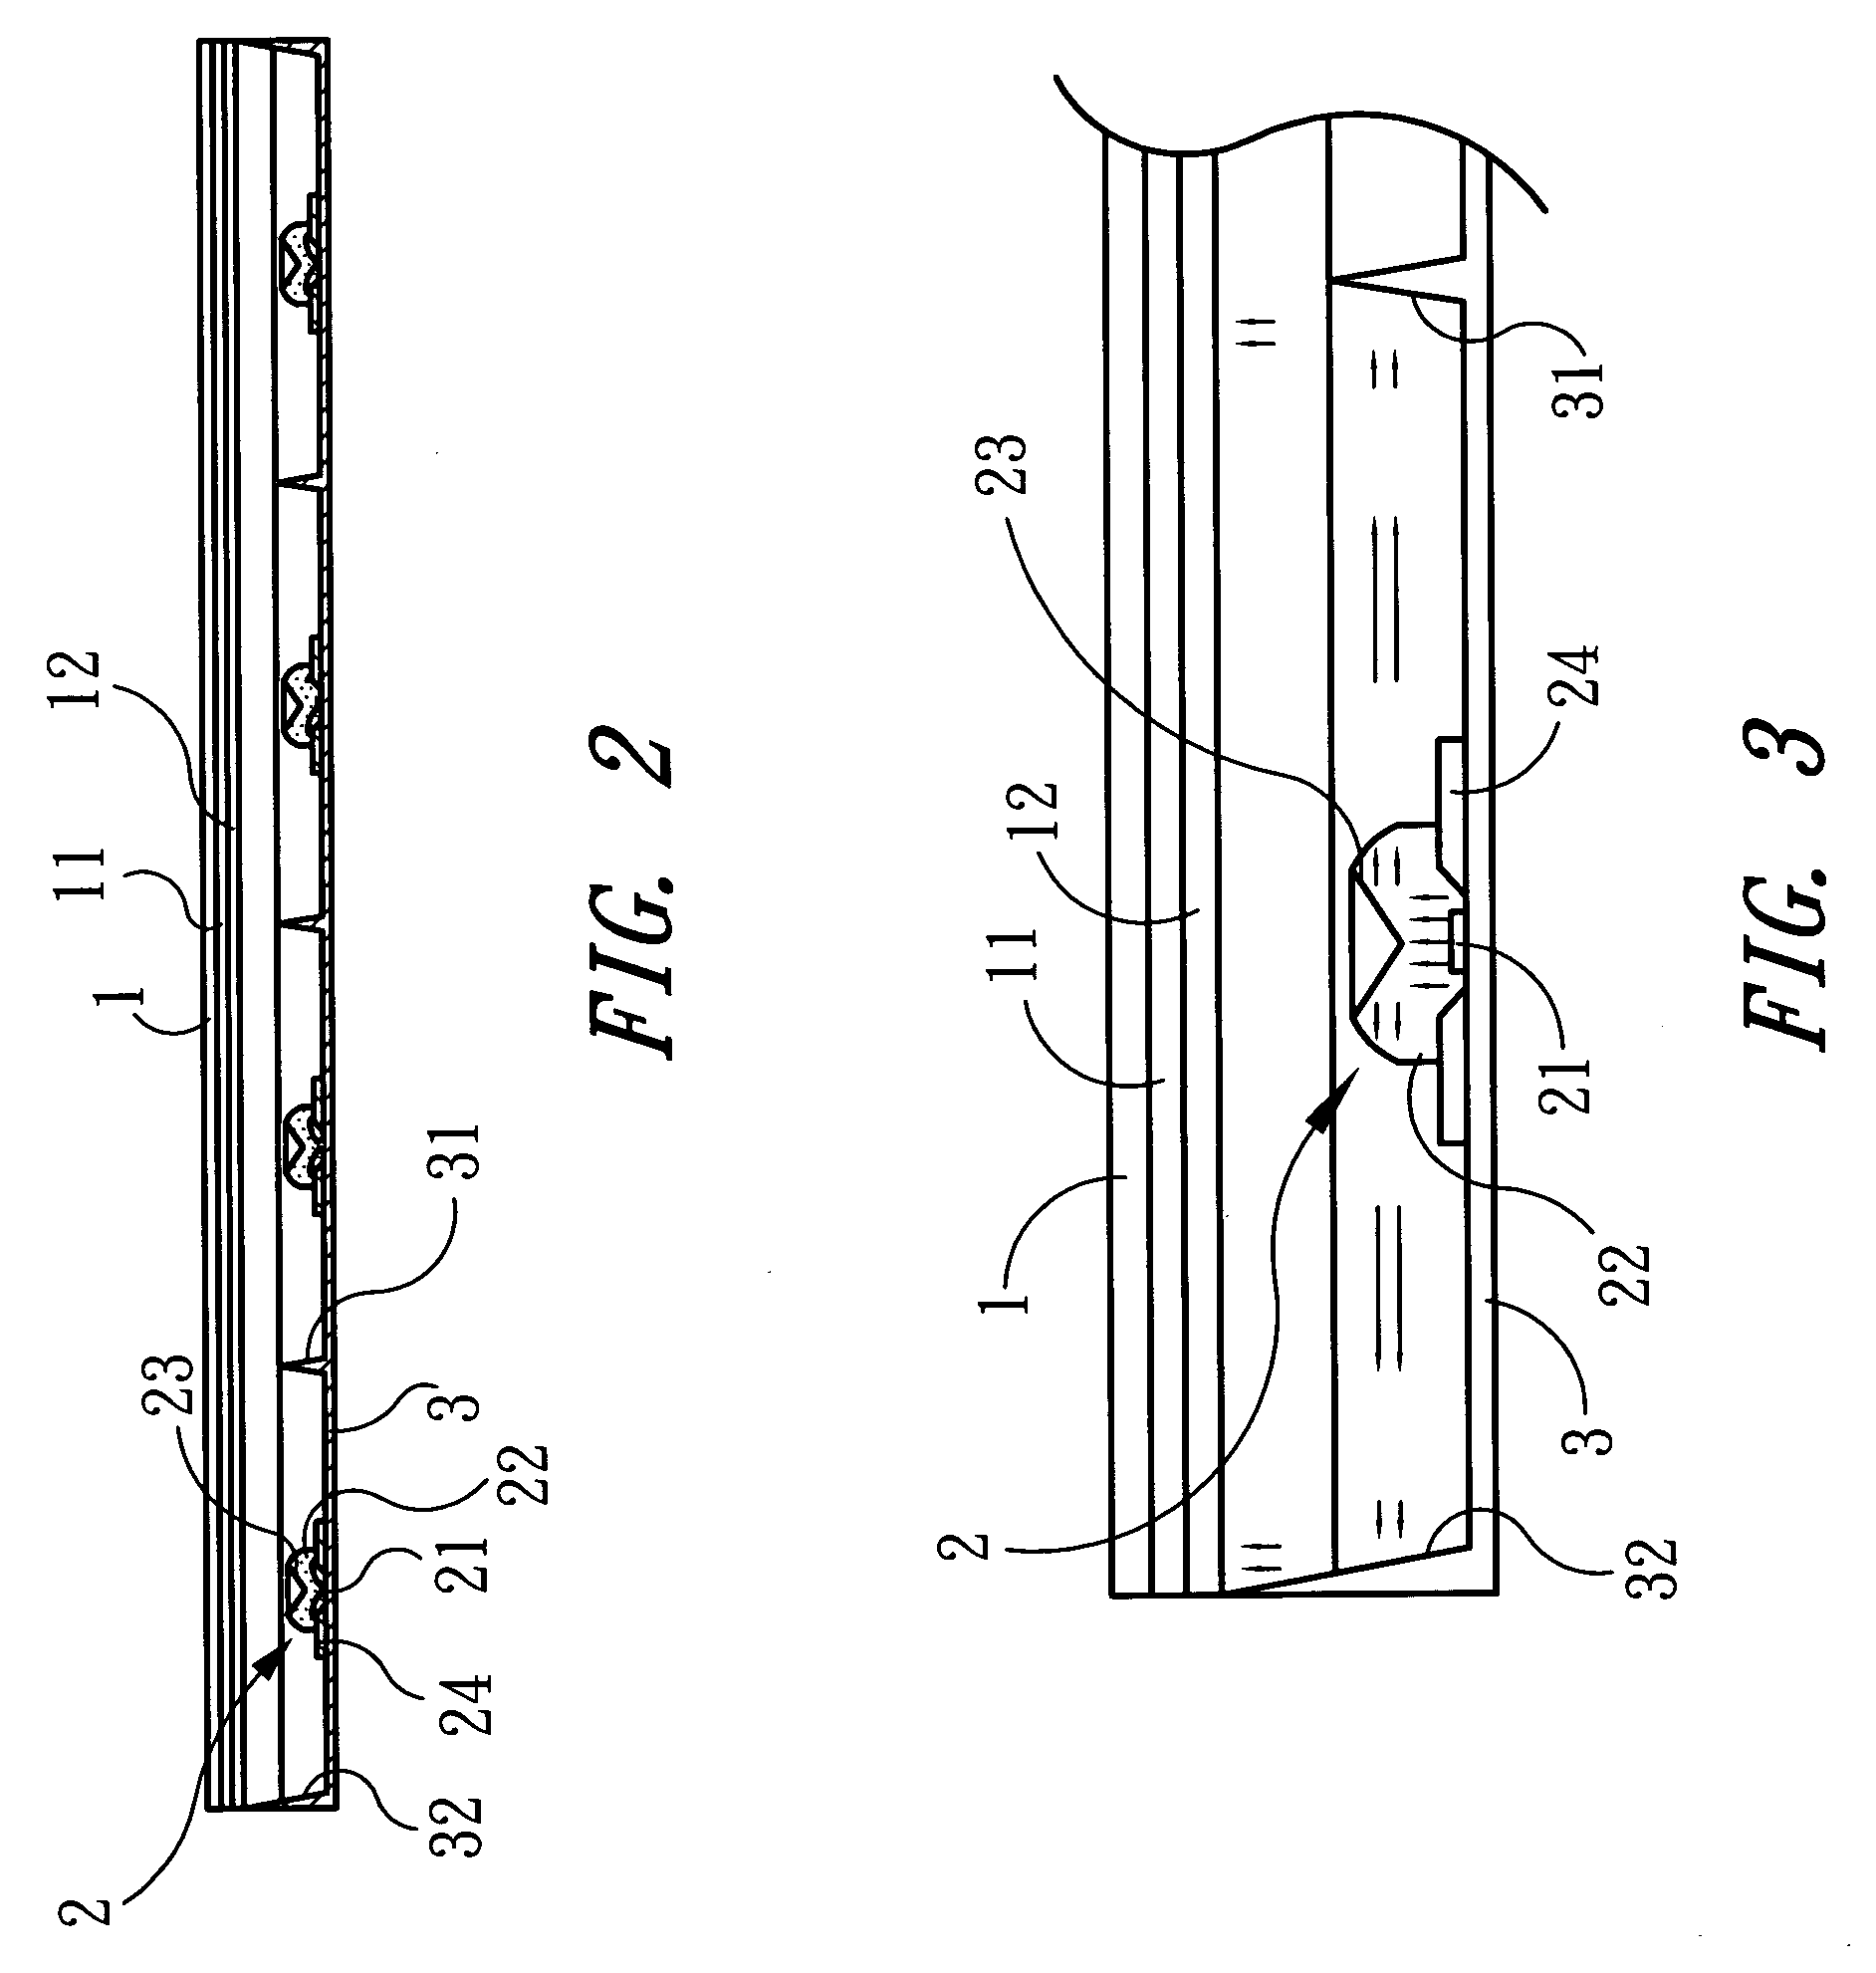 Tapered prism illumination apparatus for LCD backlight